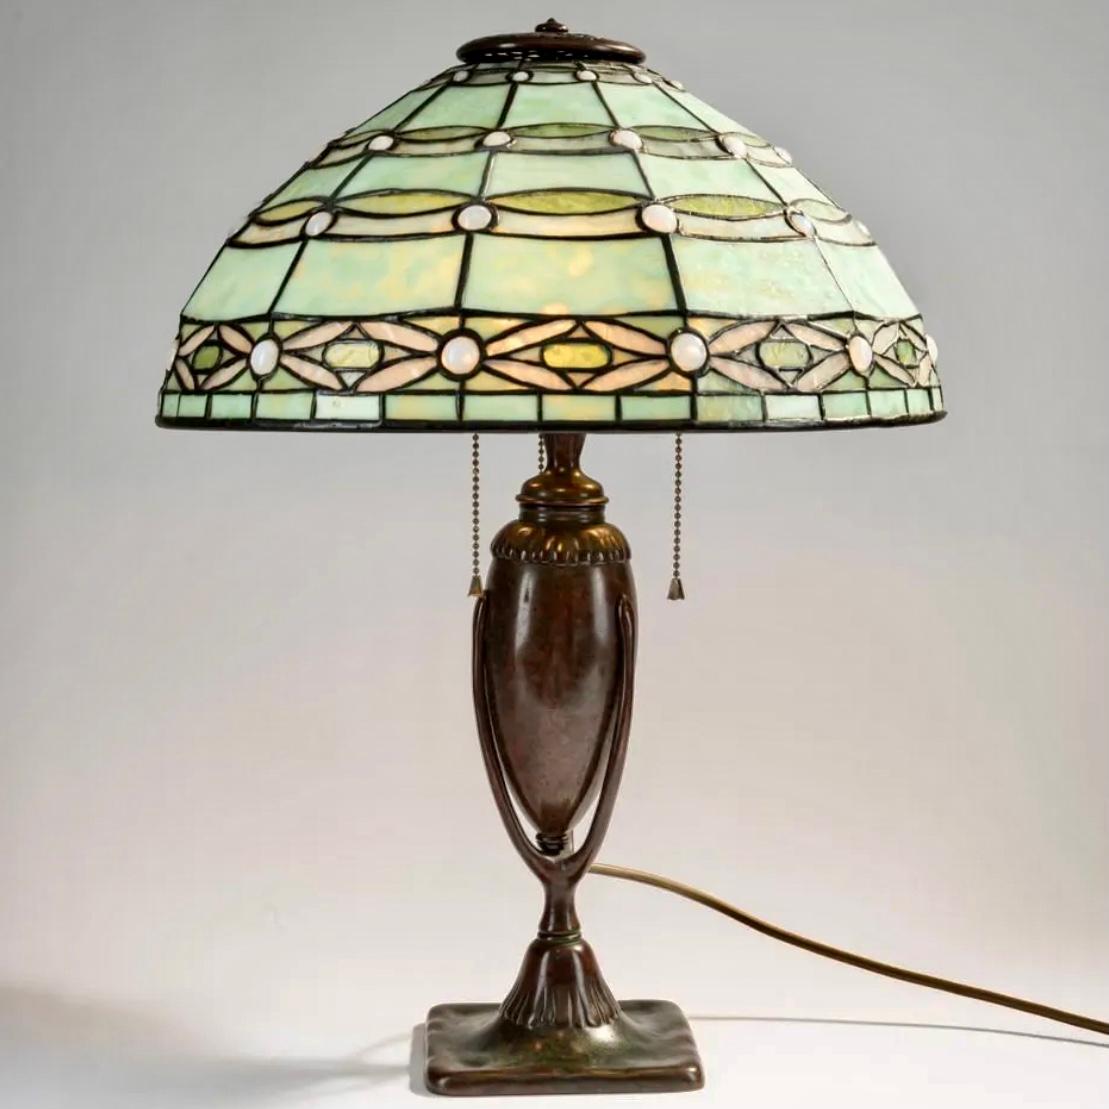 Tiffany Studios, New York, 'Jeweled Blossom' table light, c. 1907

Height: 21.5 Inches (55 cm)
Diameter: 16 inches (40.2 cm)

Leaded opal glass with some white cabochons, mainly in green and opal white tones. Ribbons with stylized flowers. Lead